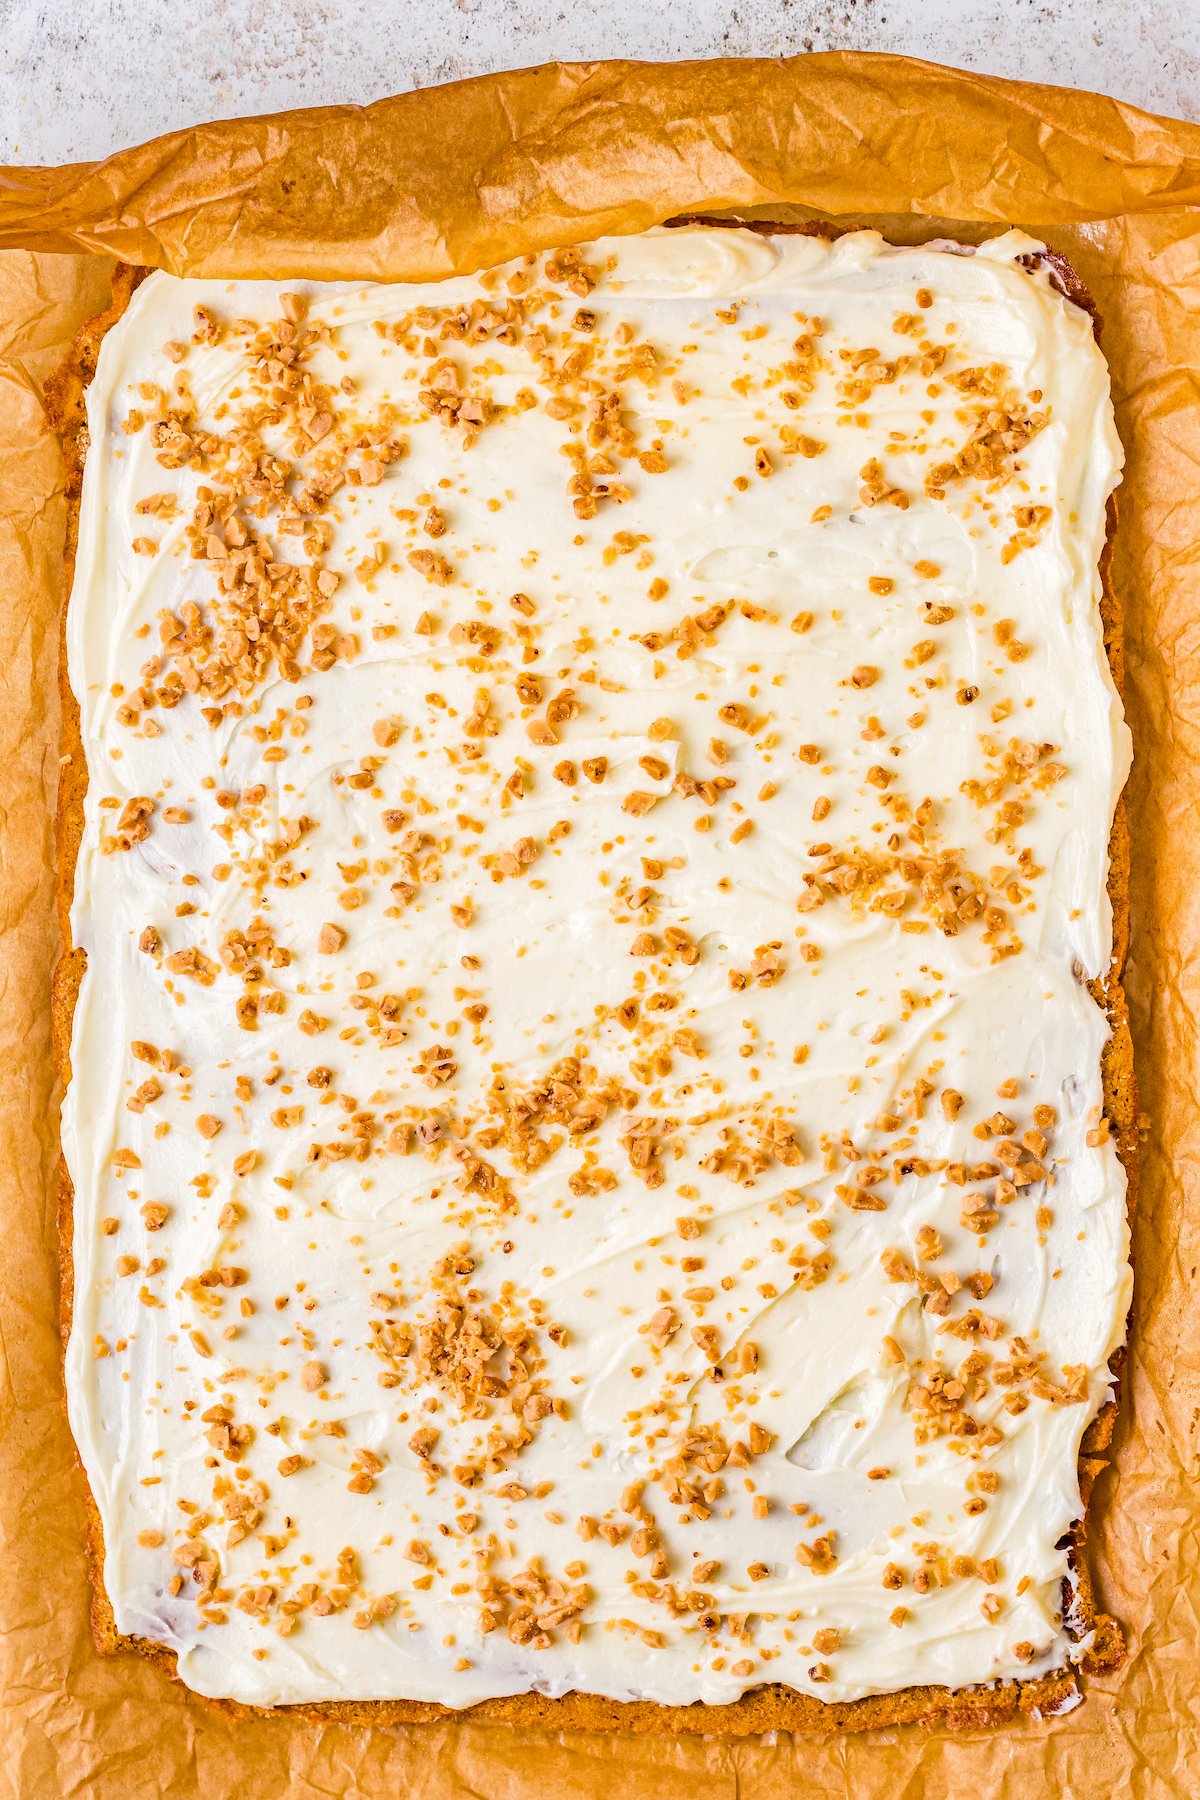 A thin pumpkin jelly roll cake spread with creamy filling and sprinkled with toffee bits.